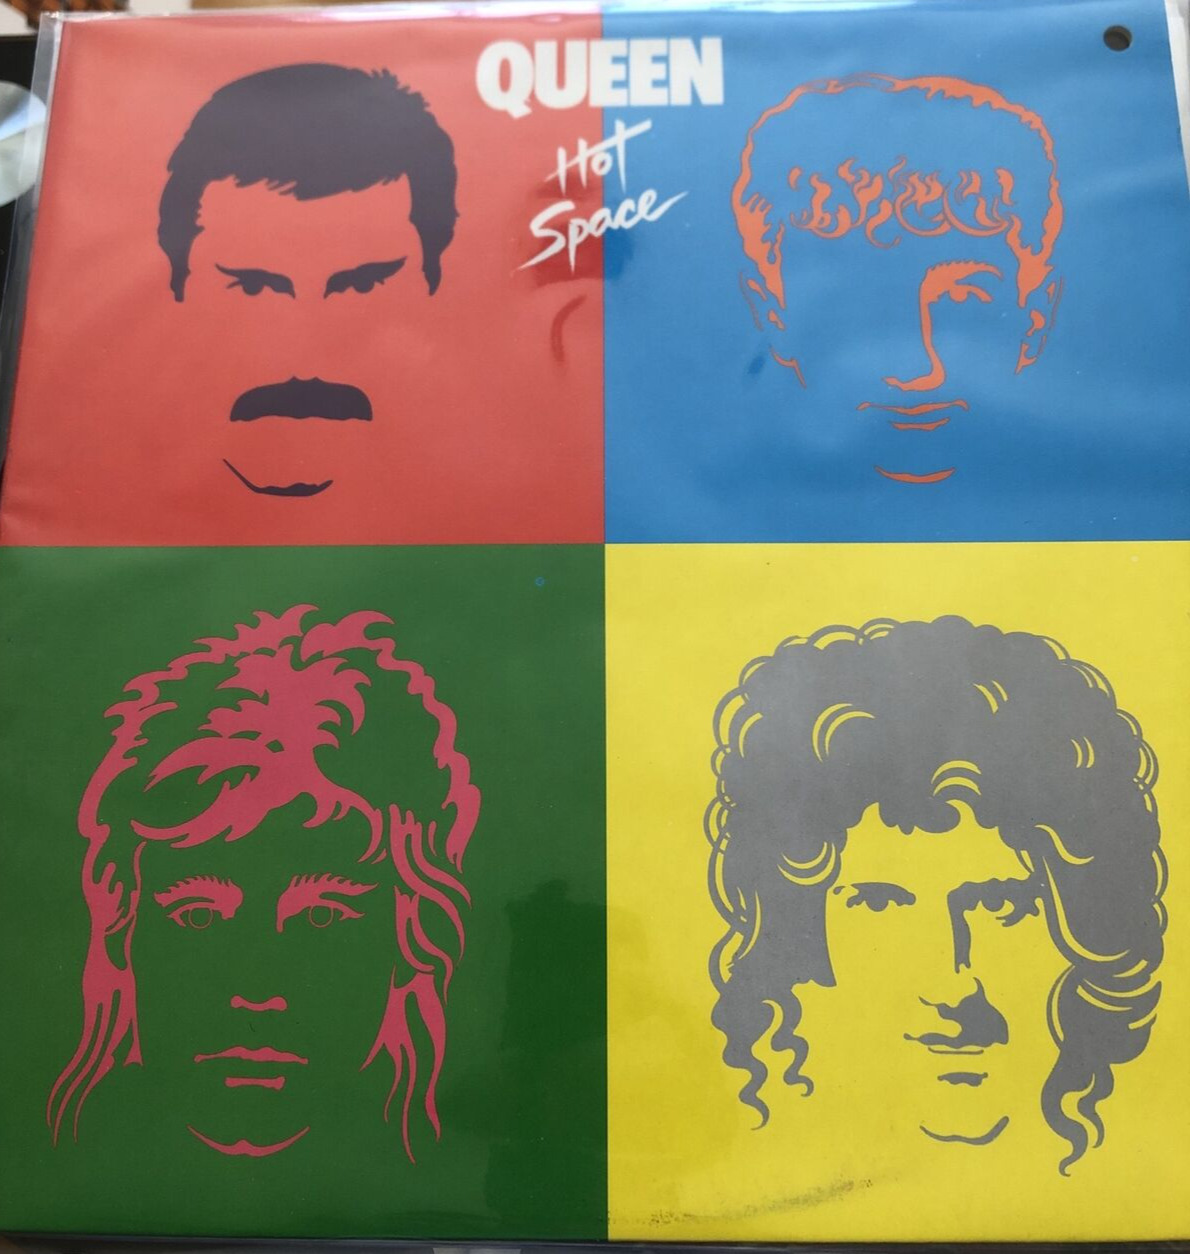 Mint- Queen Hot Space Warner Records 1st Edition 1982 Promo Punch Stereo LP